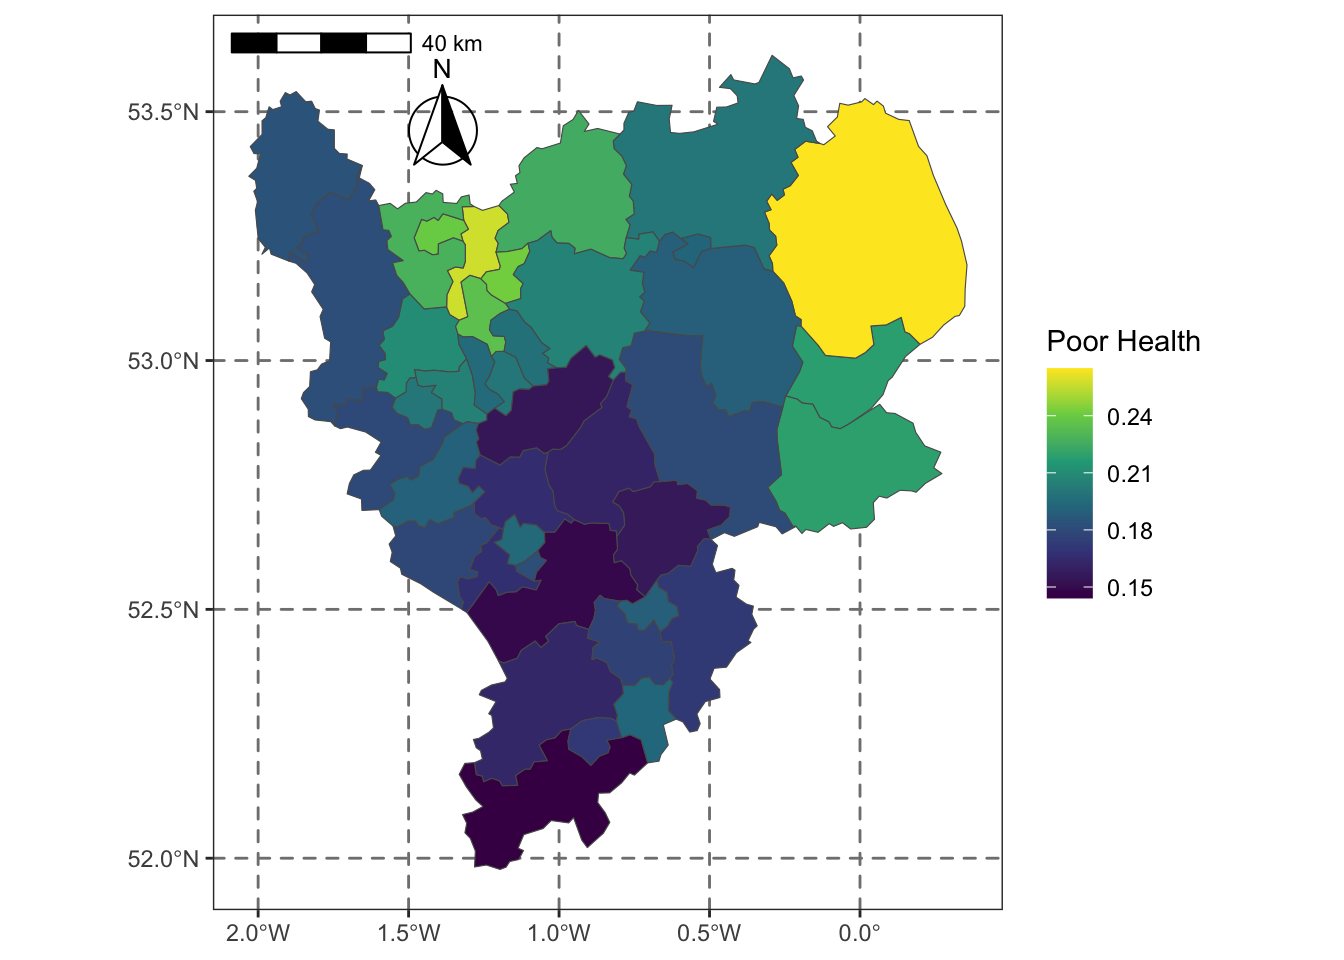 Map of Poor Healthin the East Midlands using `ggplot` with cartographic enhancements.